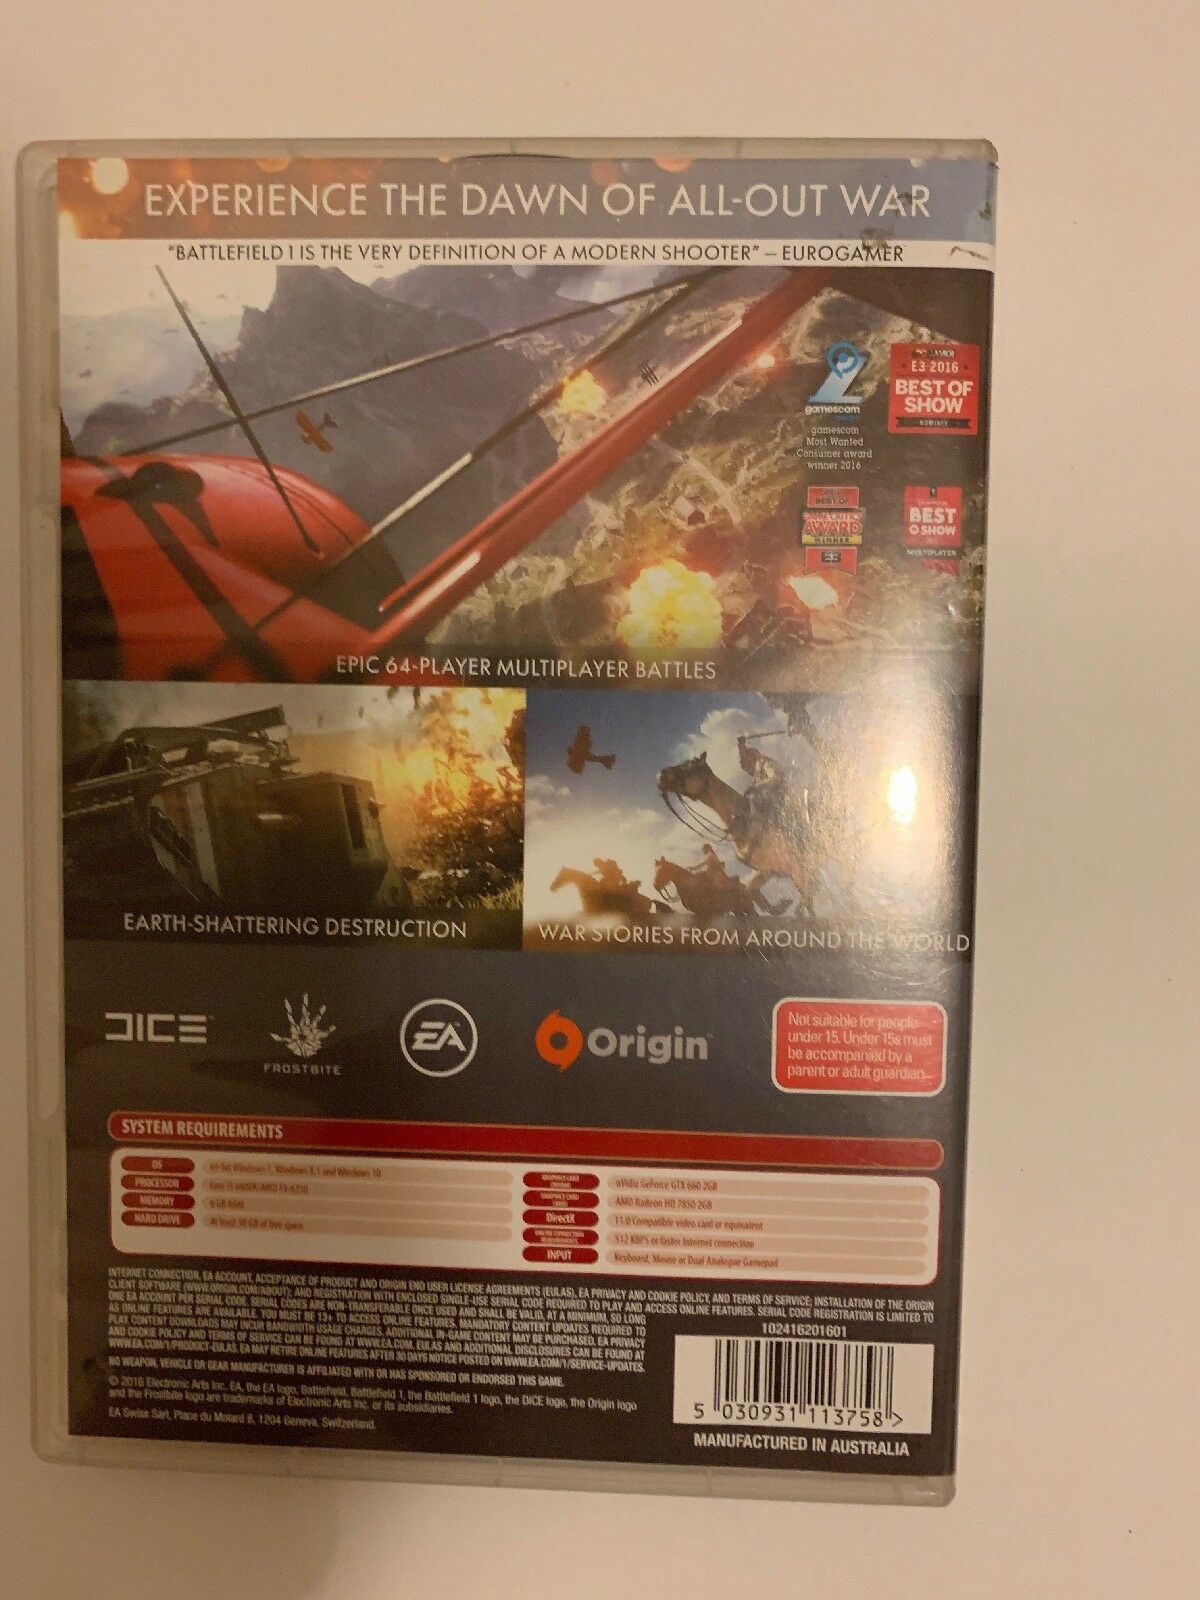 Battlefield 1 PC DVD Box - GAME NOT INCLUDED